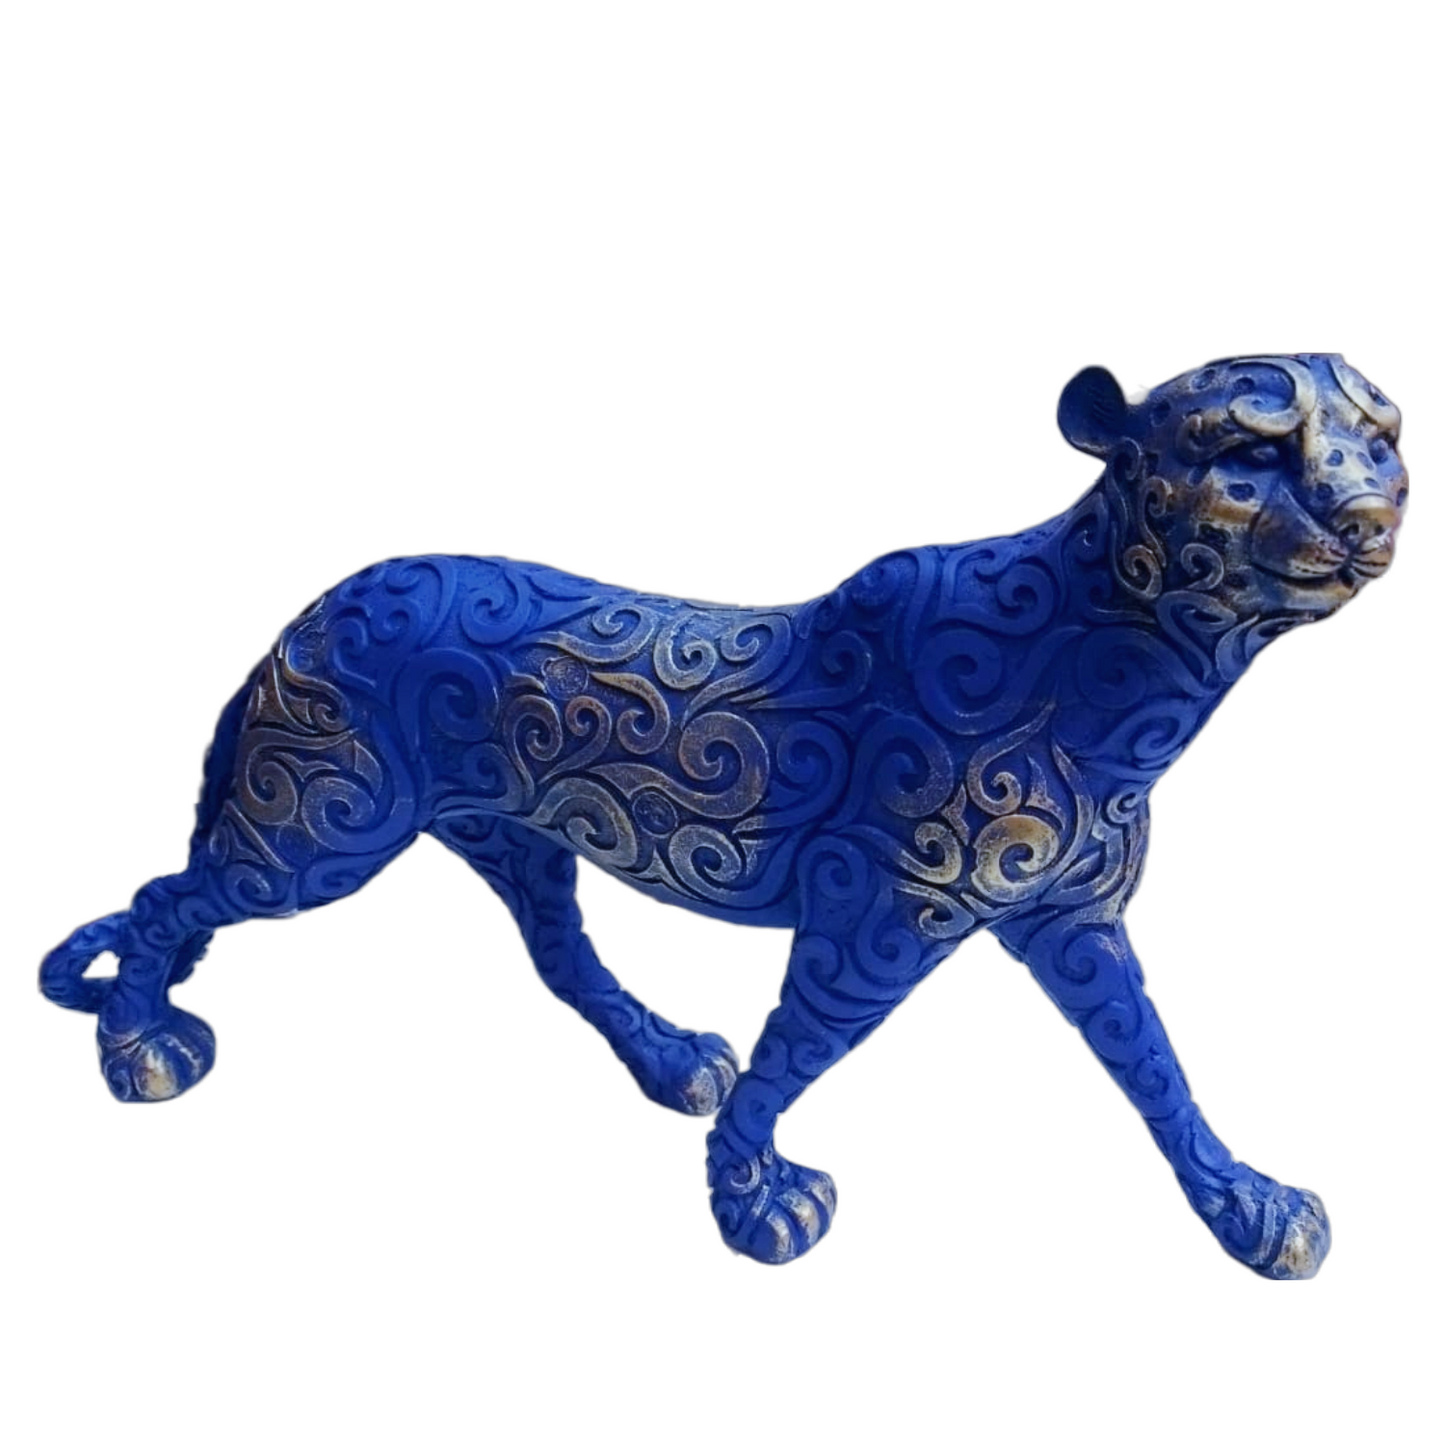 Statue ALiLA Leopard Statue Showpiece Idol for Gifting & Home Living Room Desk Office Table Decoration, Blue & Silver, Set of 3 Statue